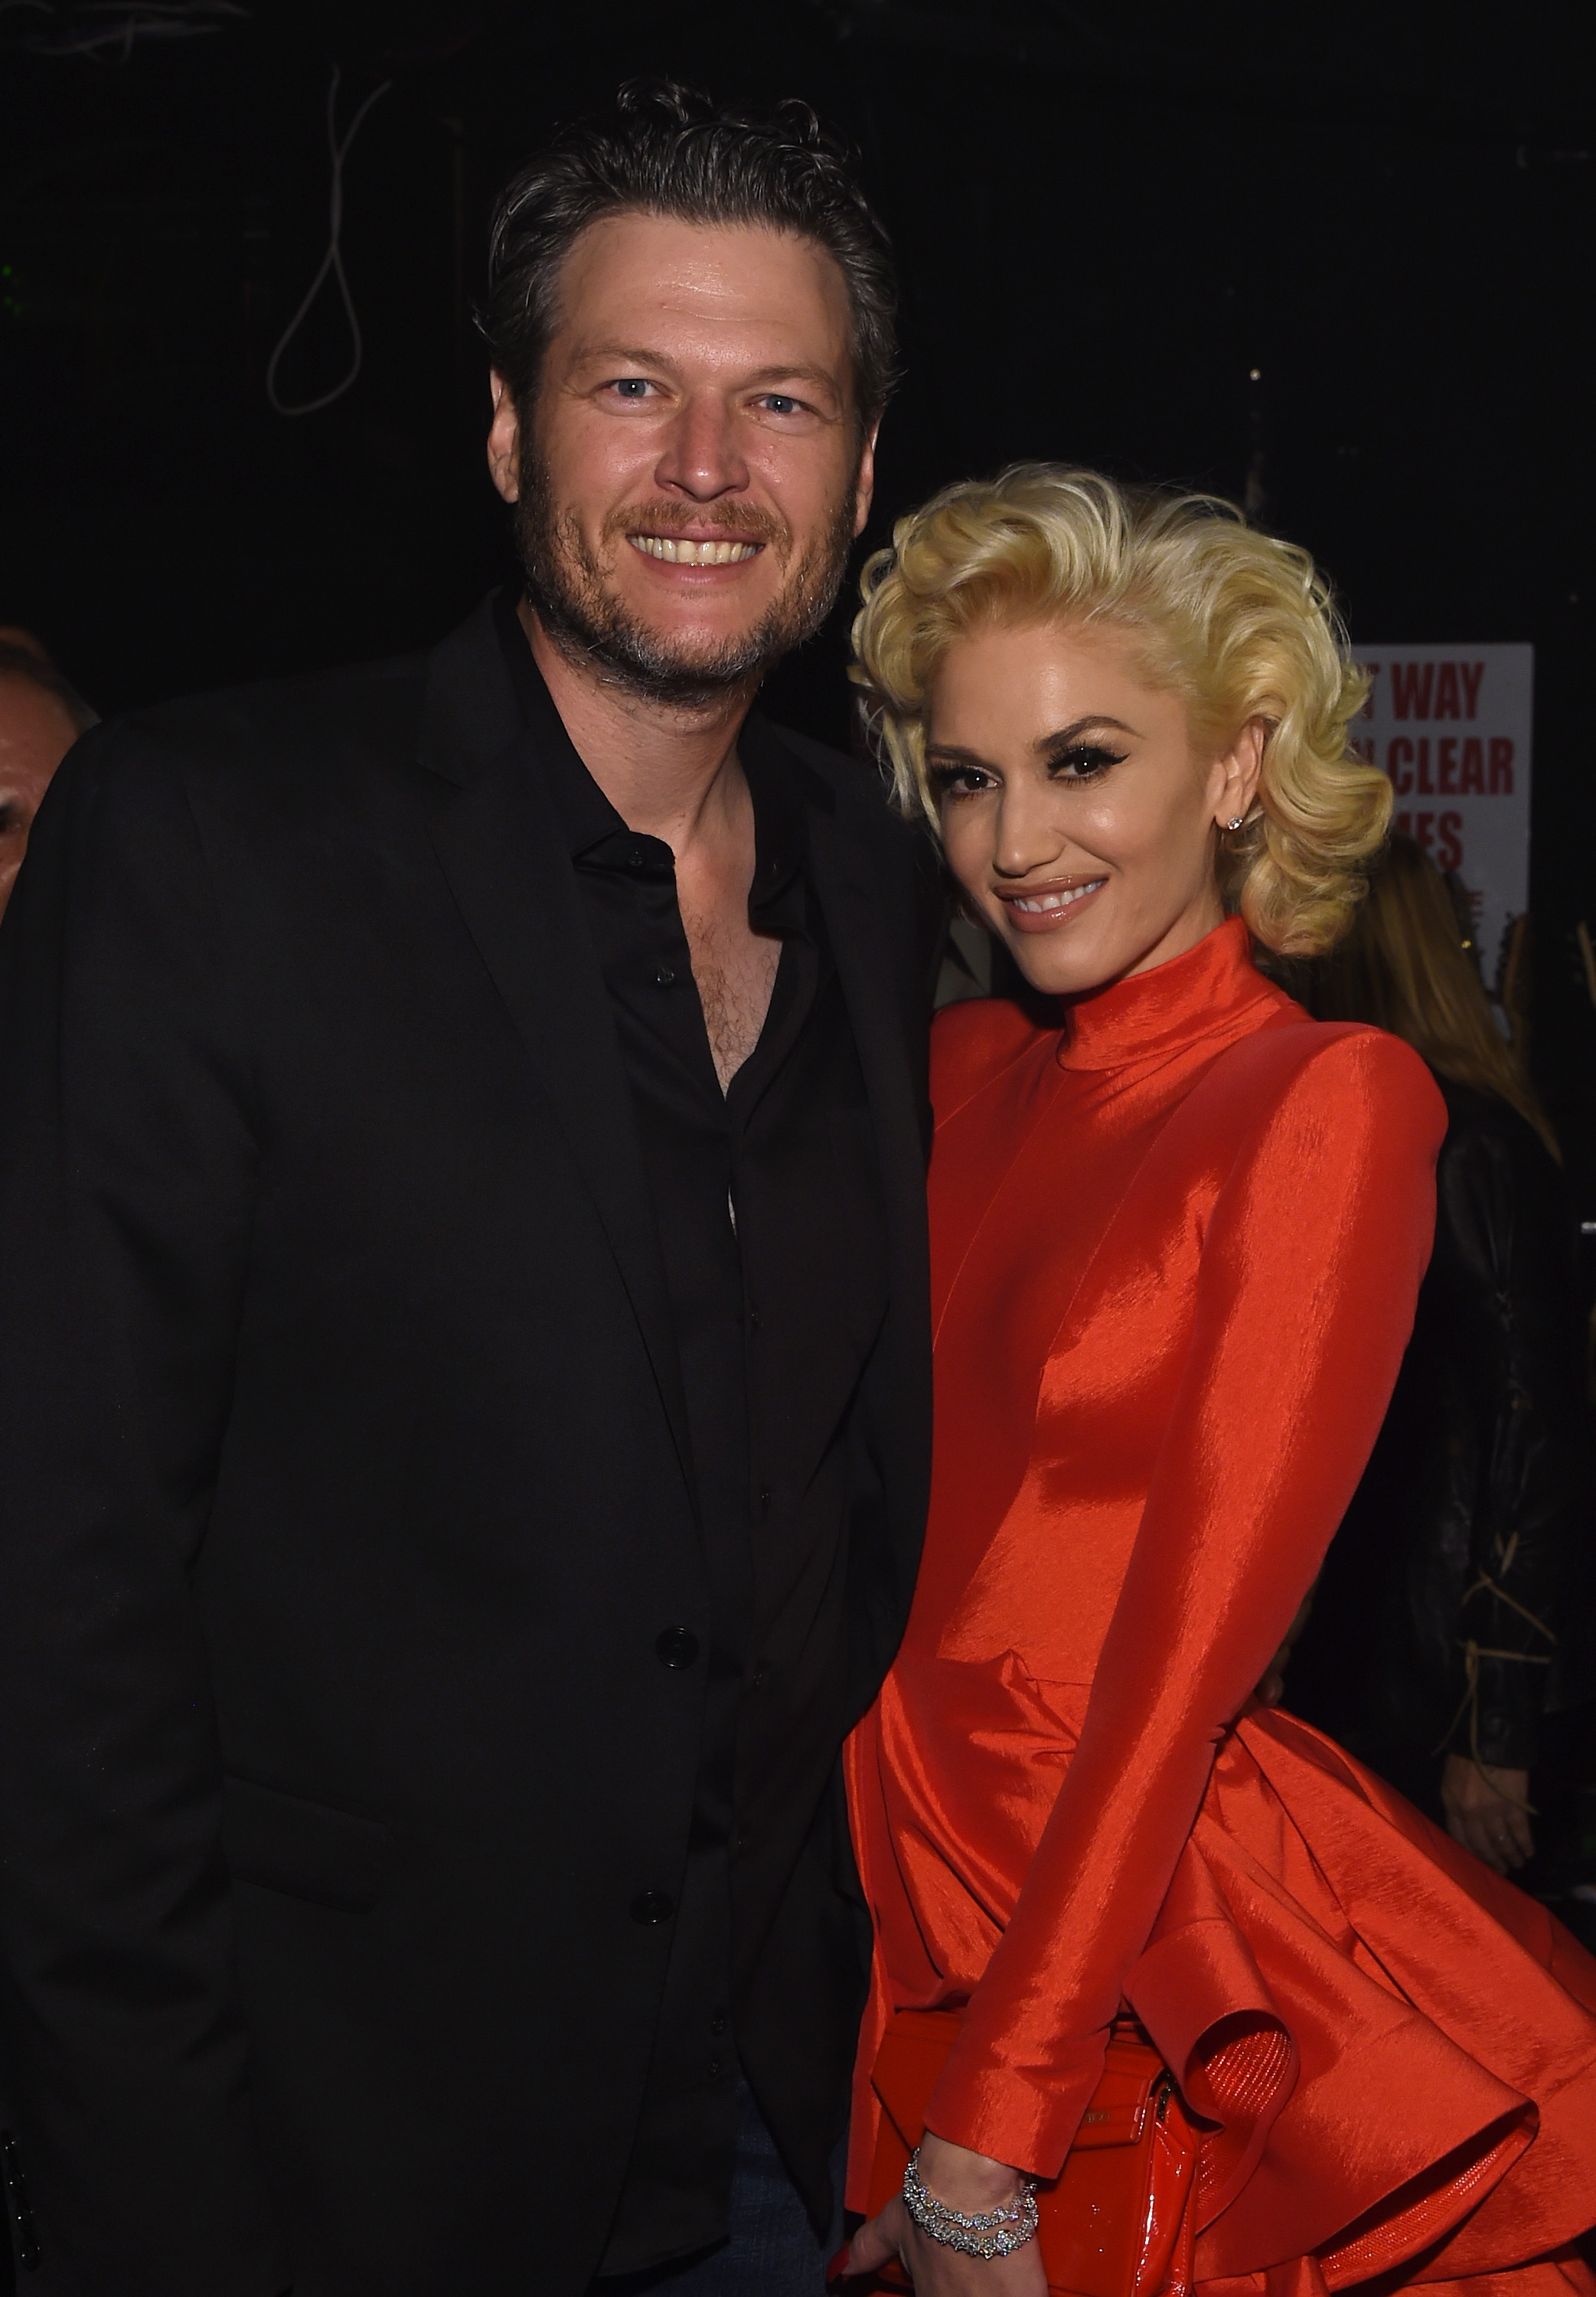 Gwen Stefani and Blake Shelton seemed very much in love as they attended church together.